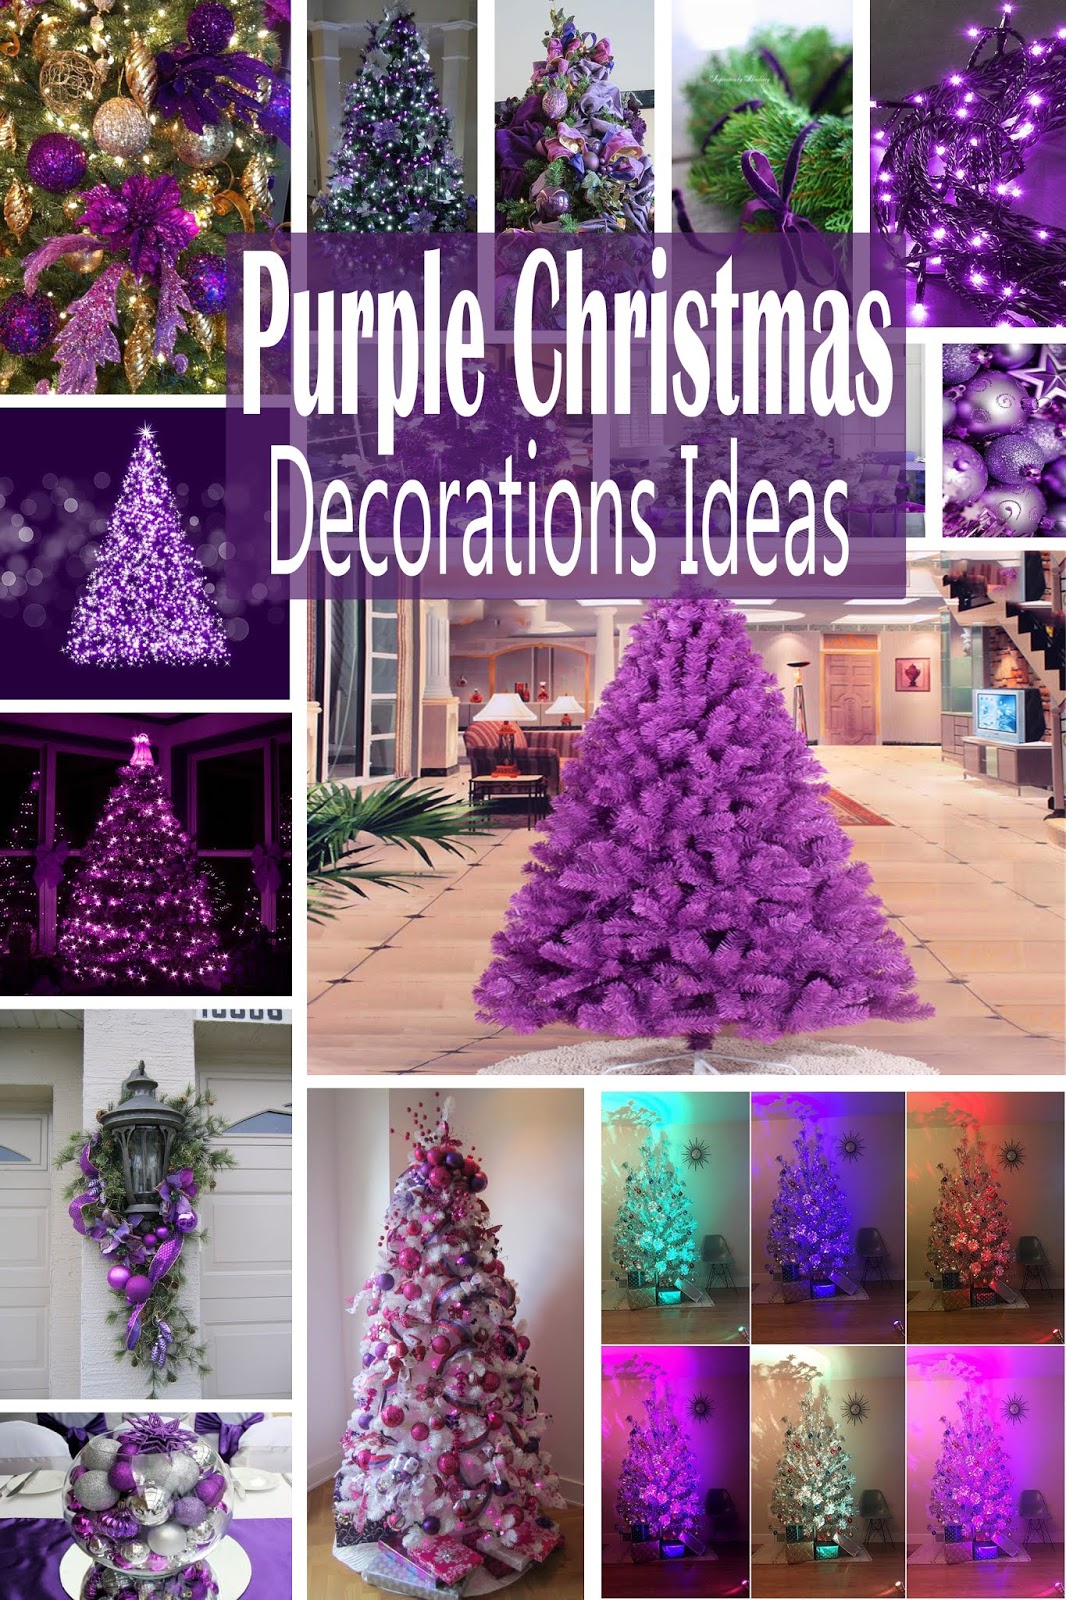 Purple Christmas Decorations Ideas - Holidays Blog For You